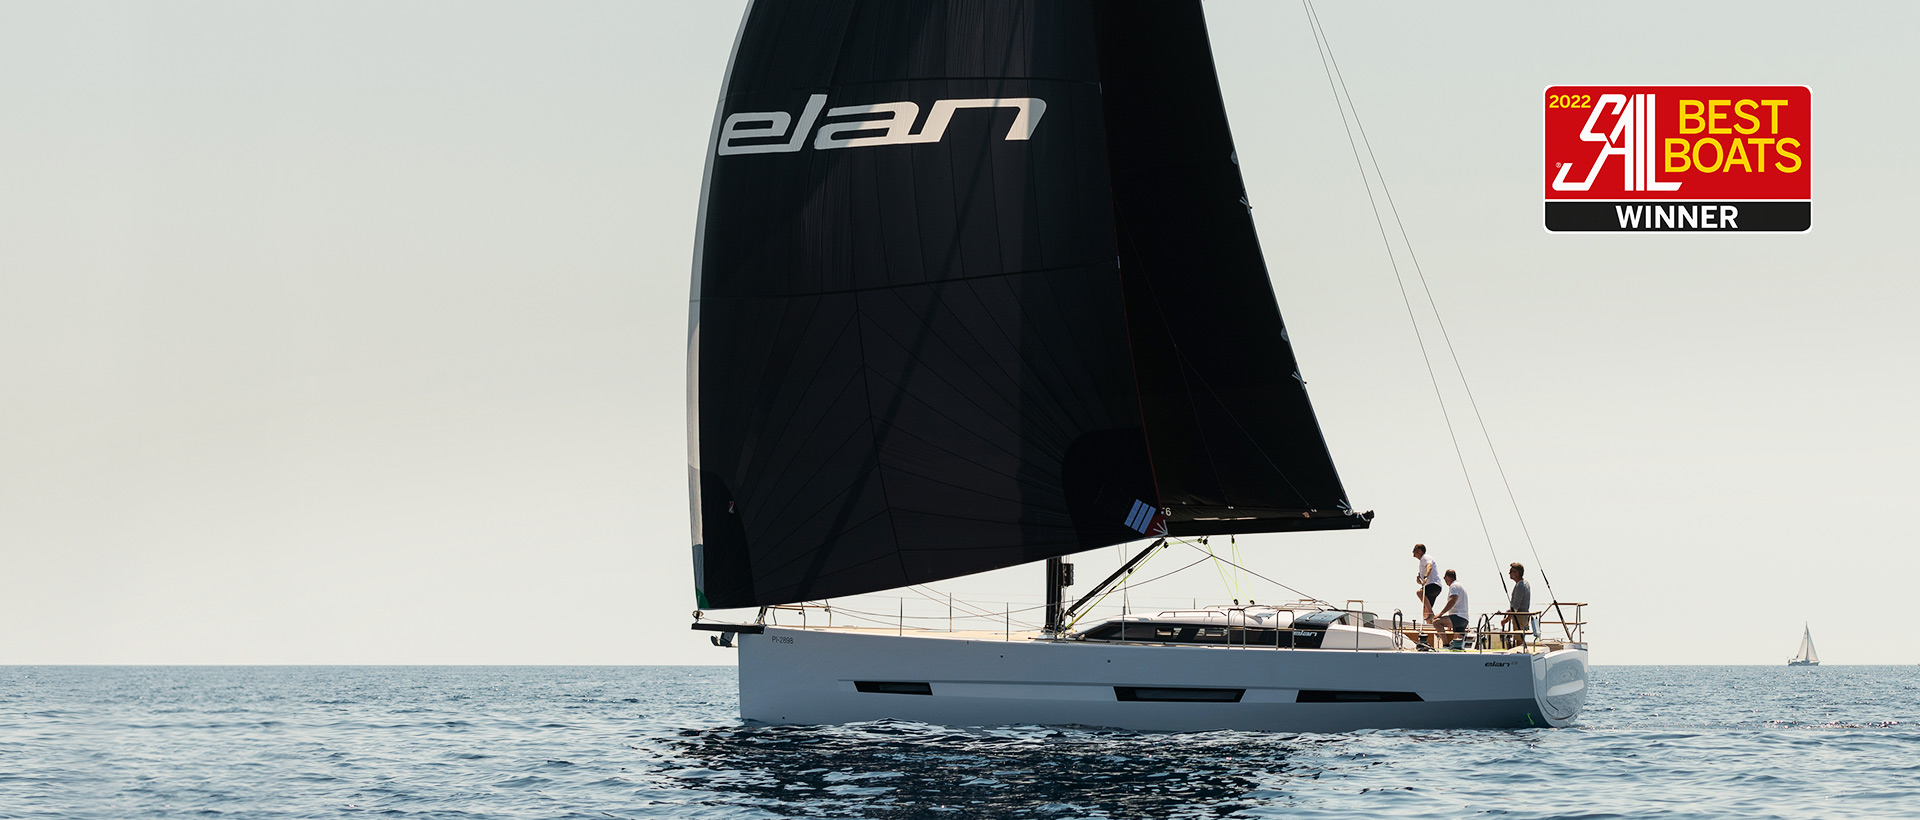 Elan Yachts Luxury Performance Cruiser gt6 under sail and with best boats 2022 logo